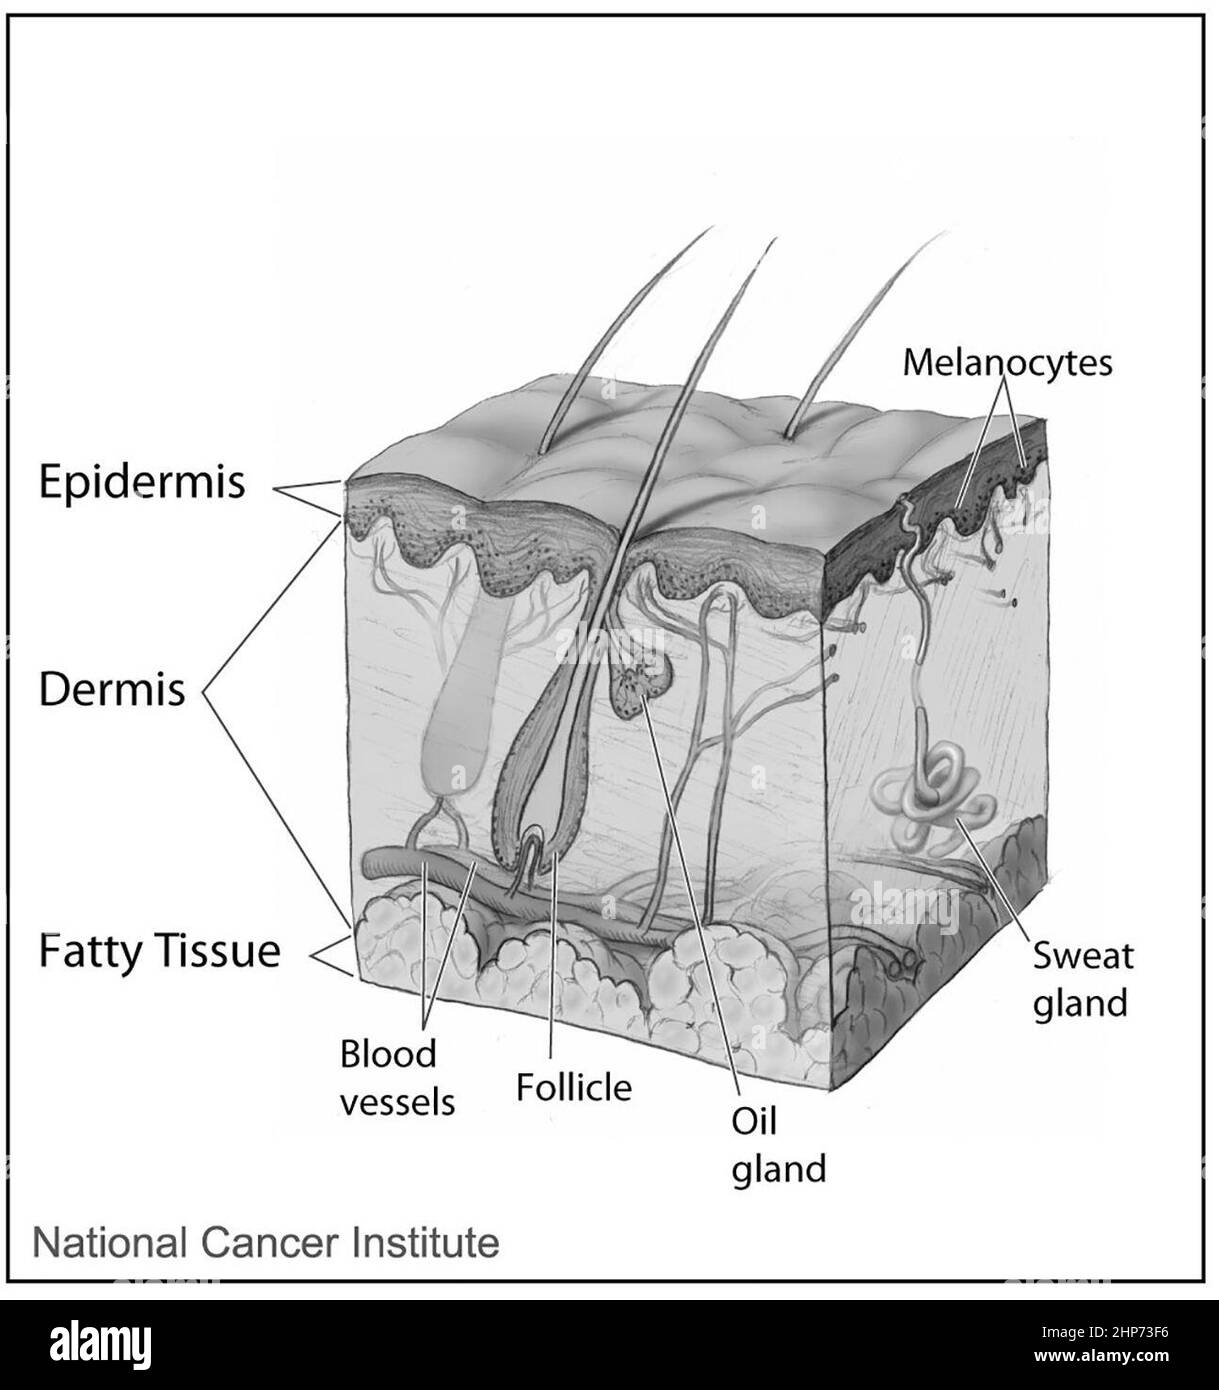 The layers of skin (epidermis, dermis, and fatty tissue) and associated glands and vessels (blood vessels, follicle, oil gland, sweat gland, and melanocytes) ca.  2005 Stock Photo